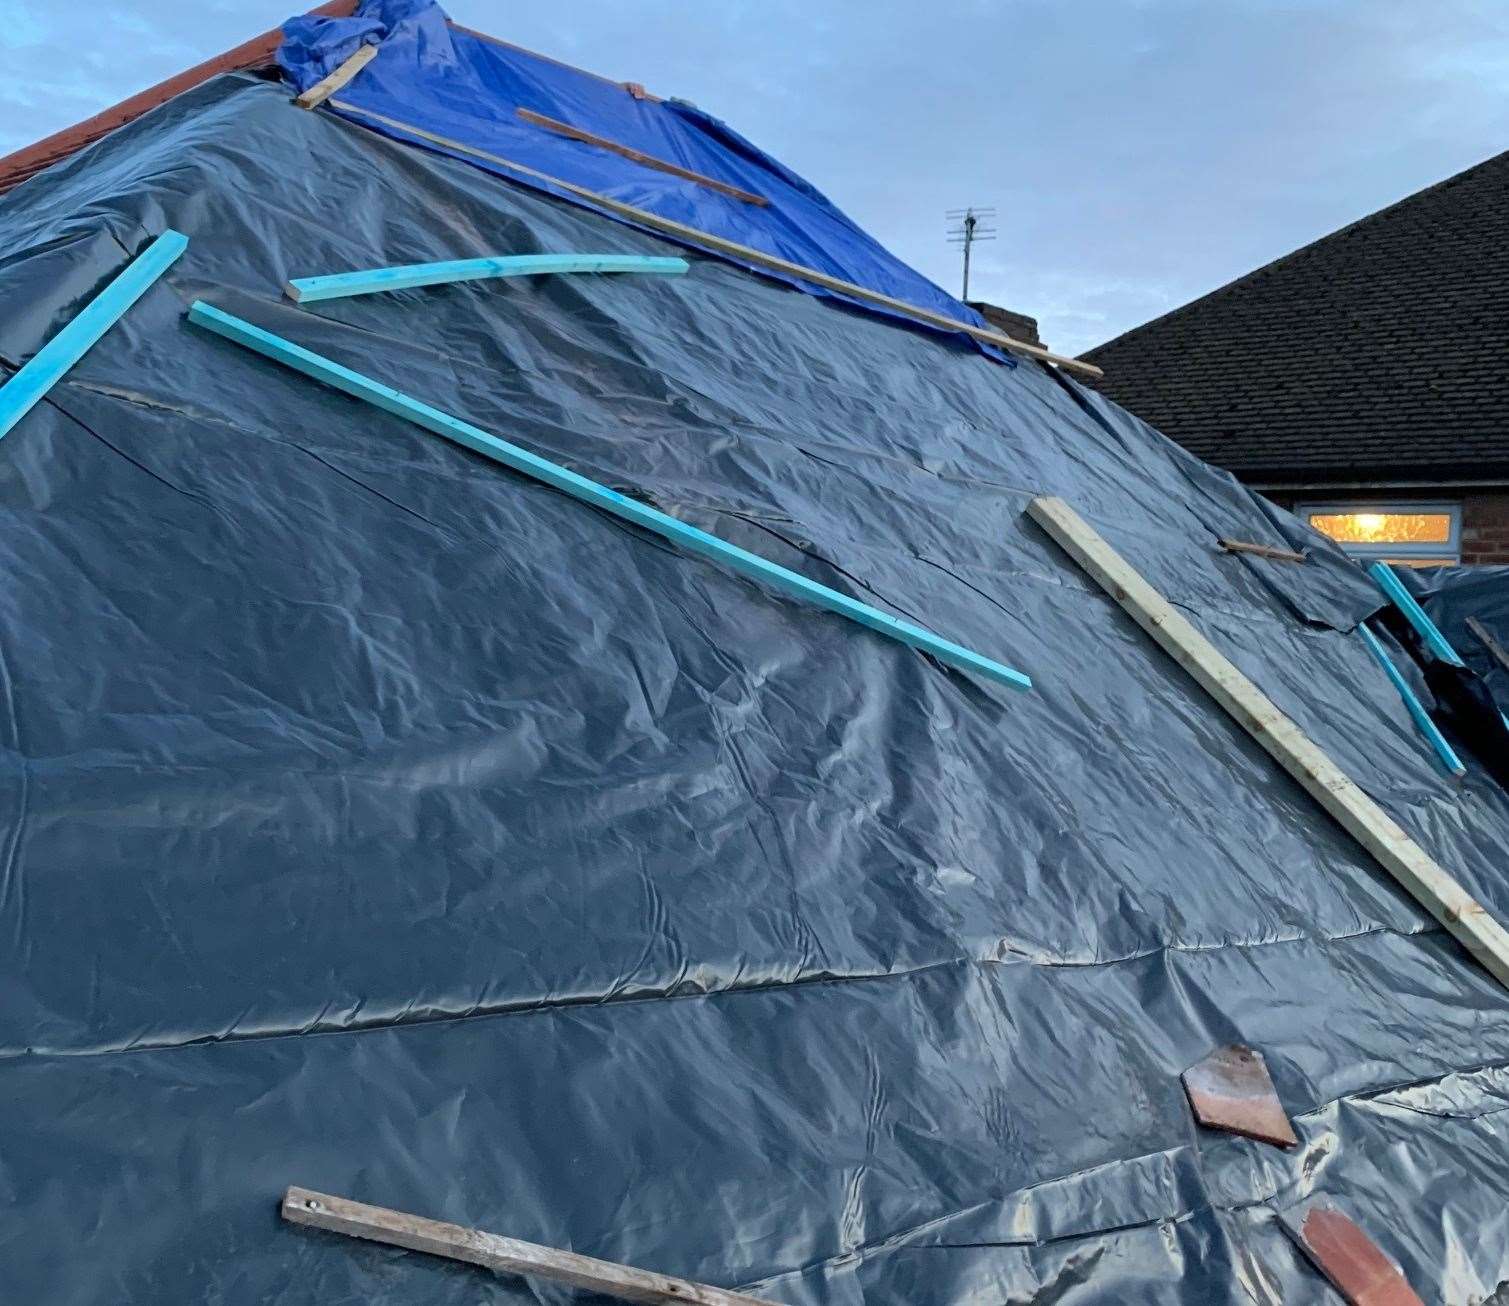 Makeshift sheeting covers up damage caused by the fraudsters